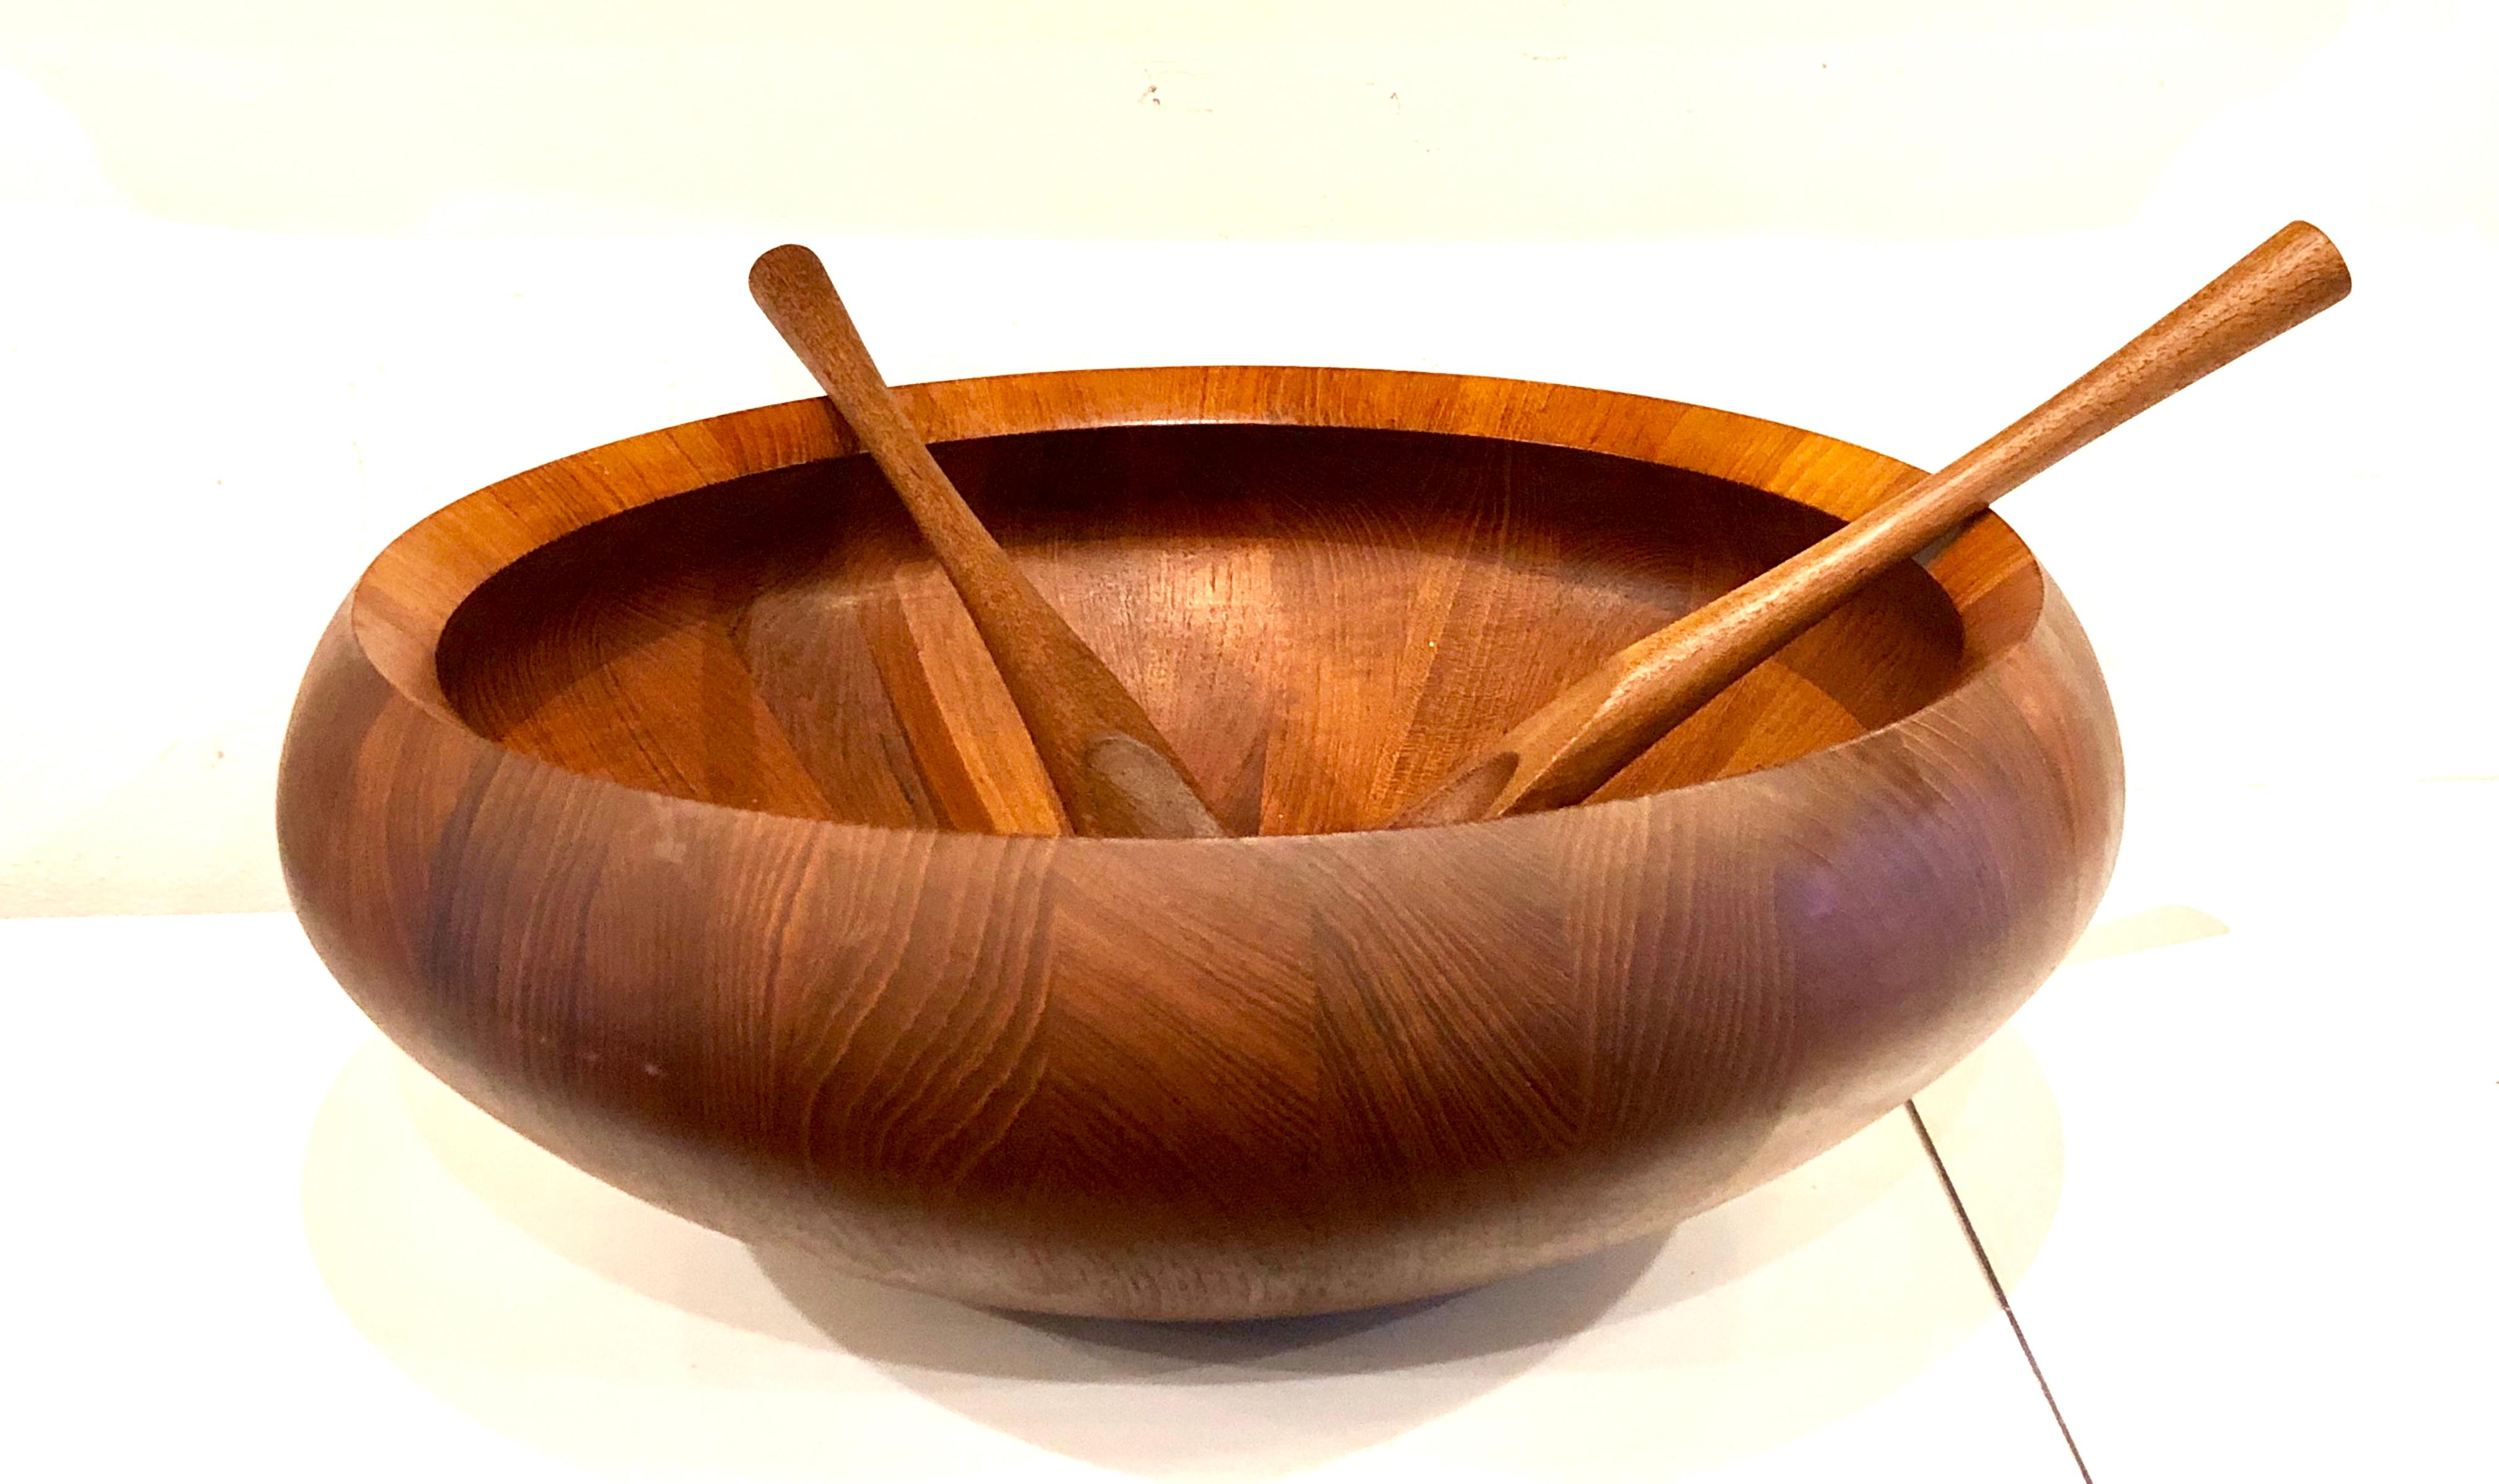 Beautiful and rare X-large staved teak salad bowl designed by Jens Quistgaard for Dansk, circa 1980s. The piece comes with its original teak servers and has been recently oiled. There is a small gap in one of the staved joints (please see pictures).